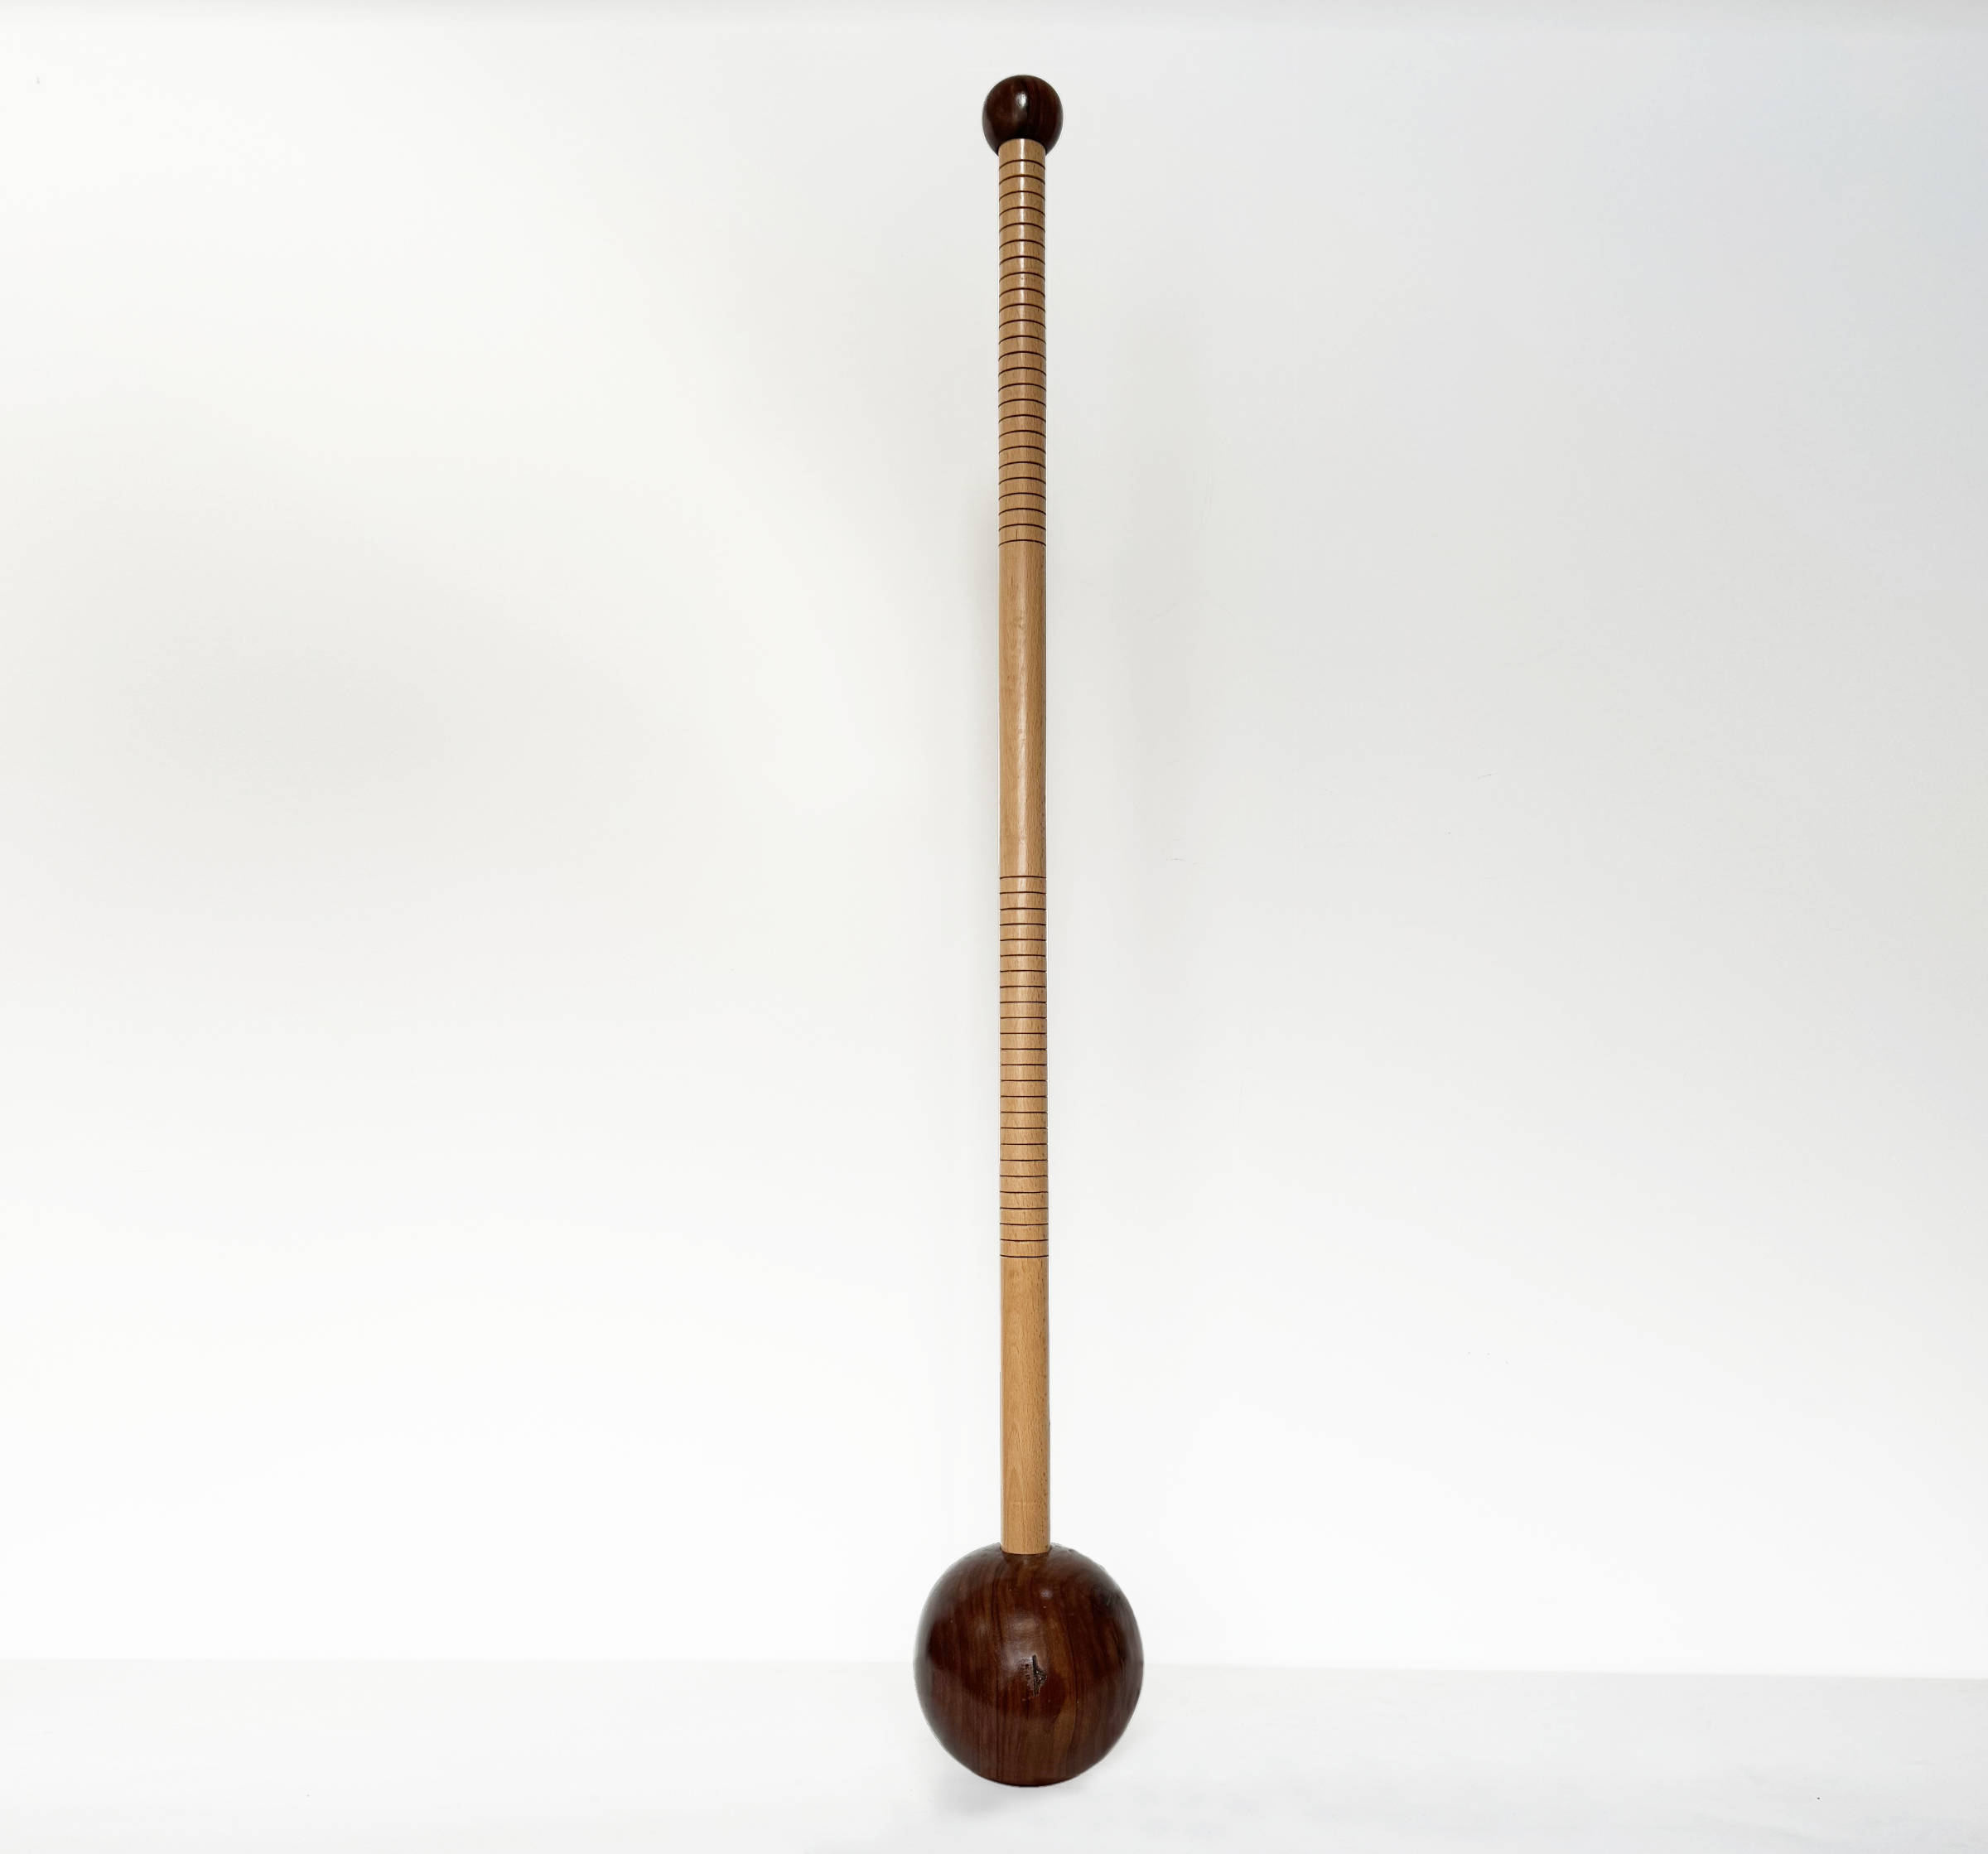 2kg Matchstick mace from BodyMindFit